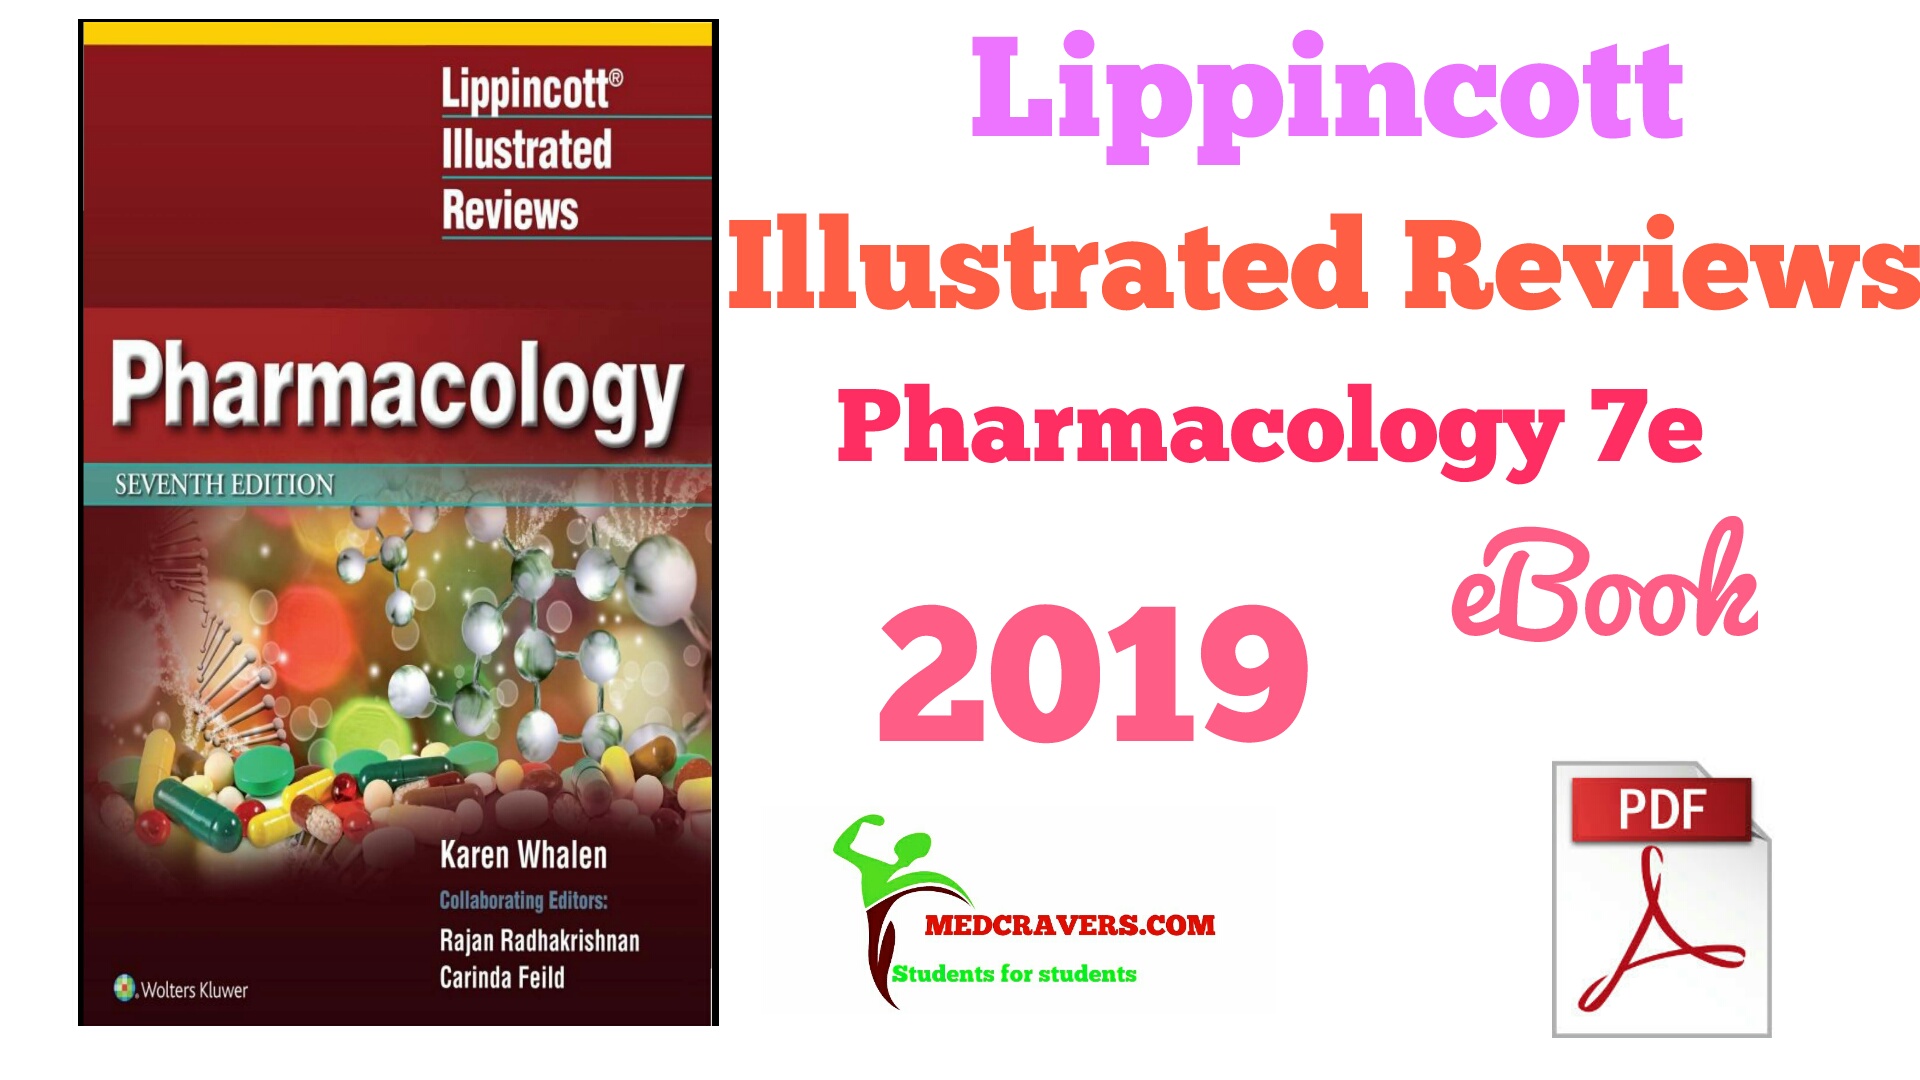 conceptual review of pharmacology pdf